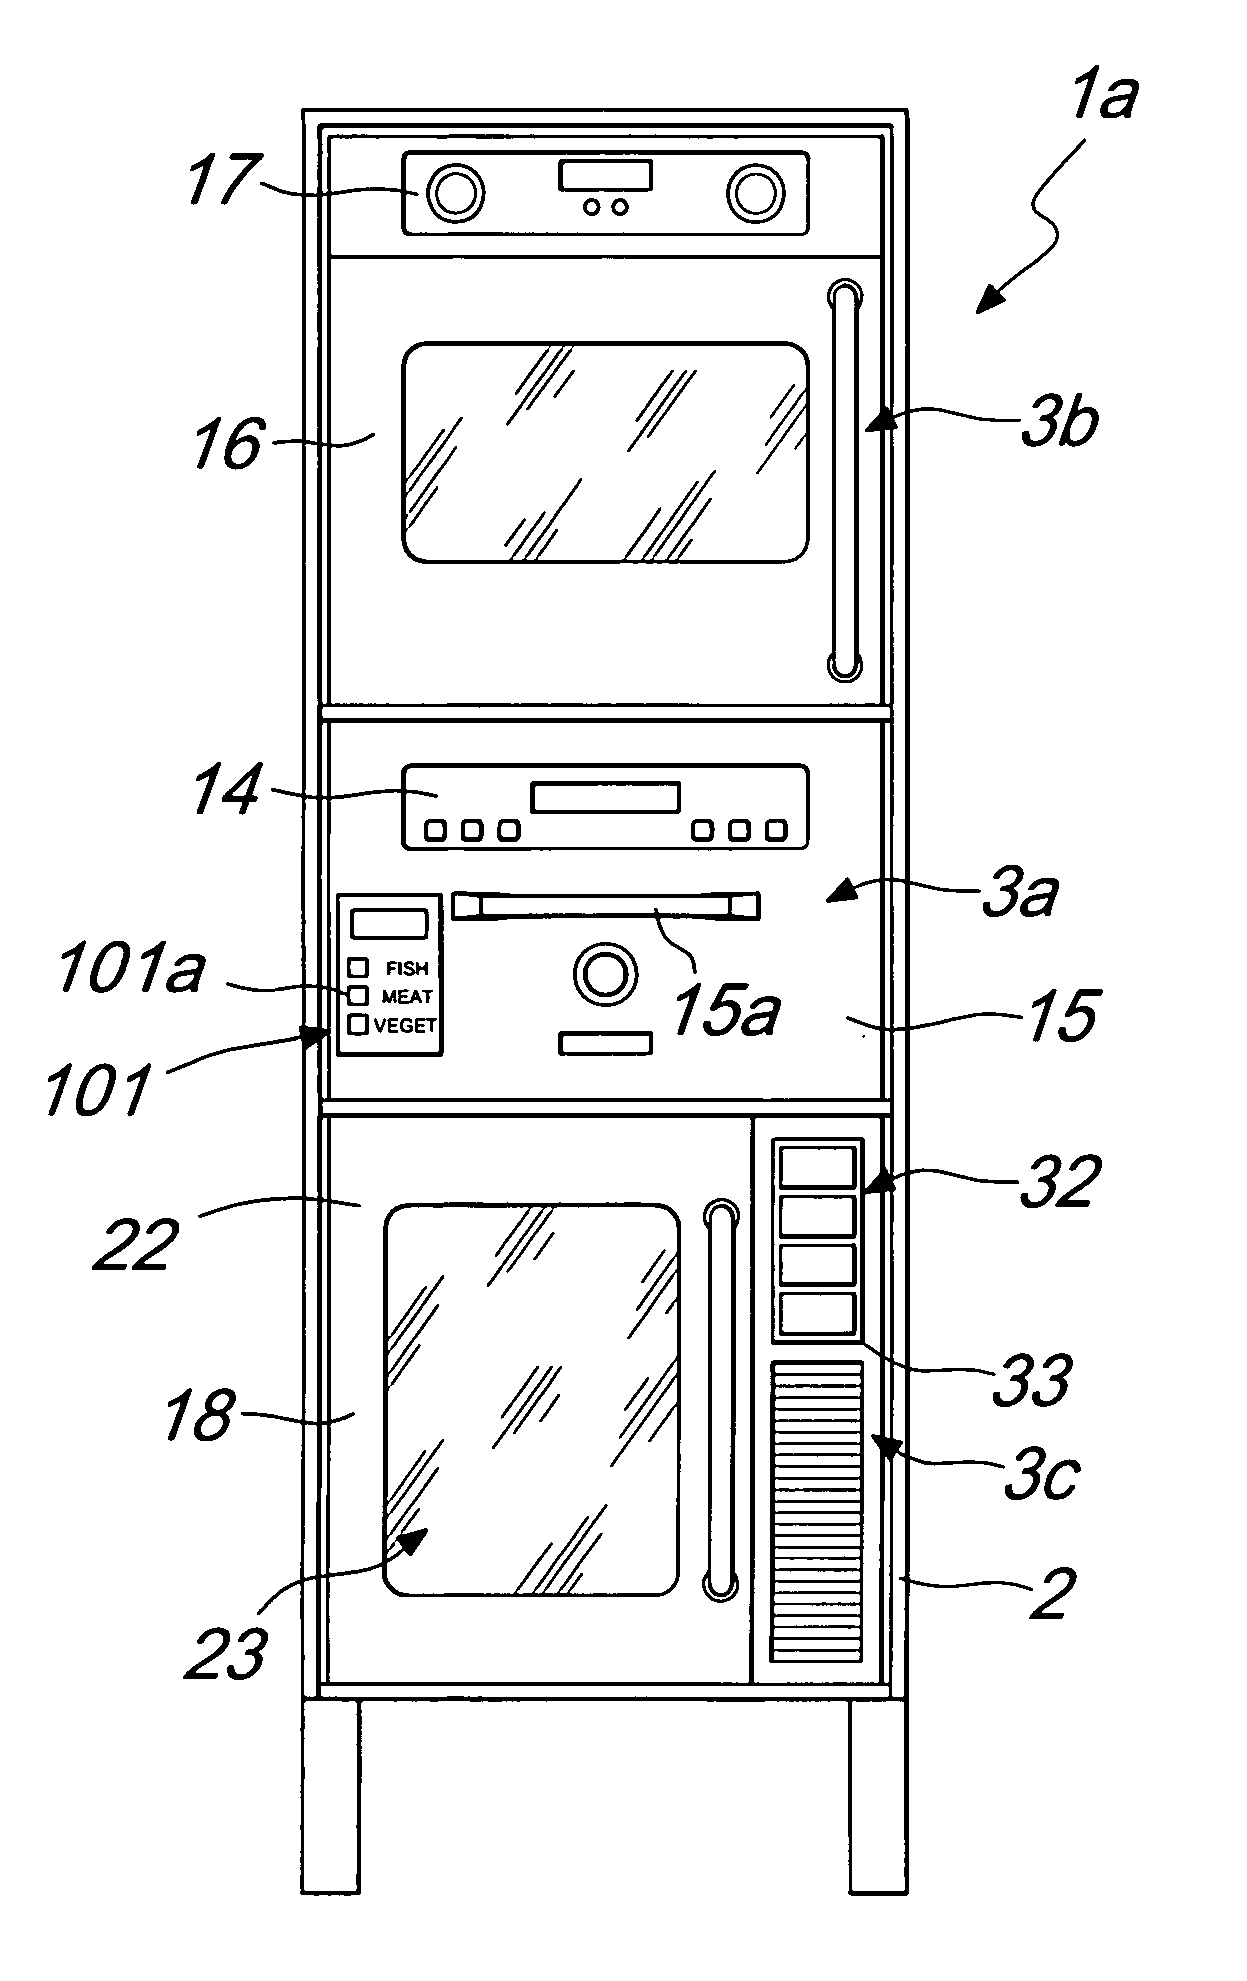 Vacuum cooking apparatus for household use